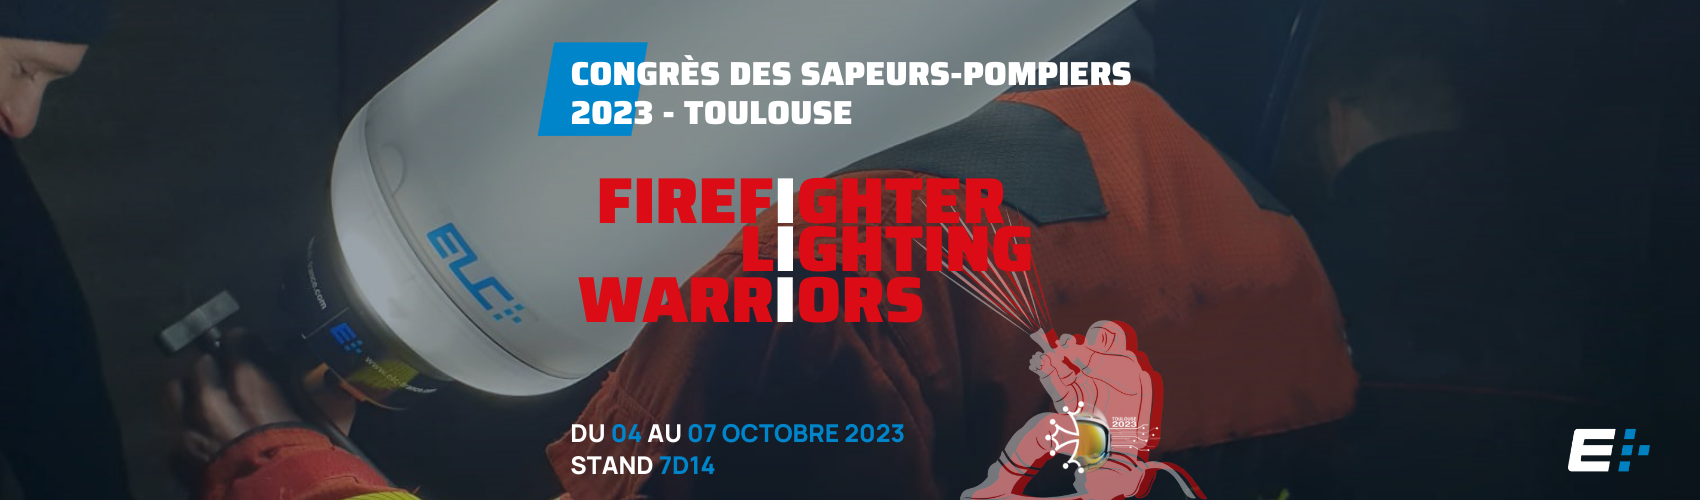 Firefighters Congress 2023 - TOULOUSE